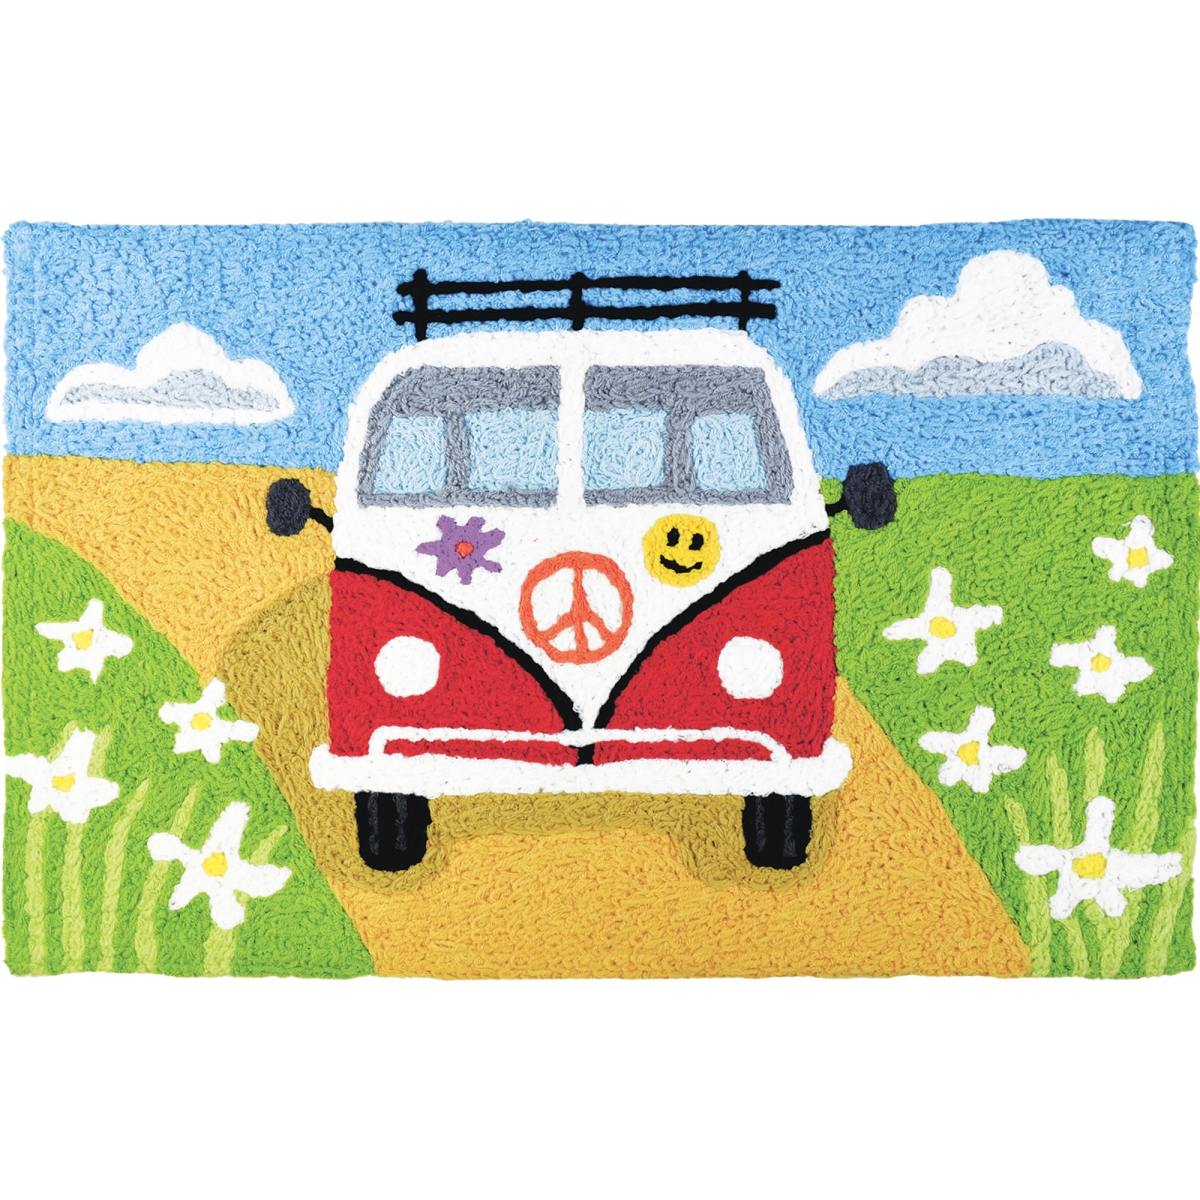 Jb-tf013 20 X 30 In. Vw Touring Rug